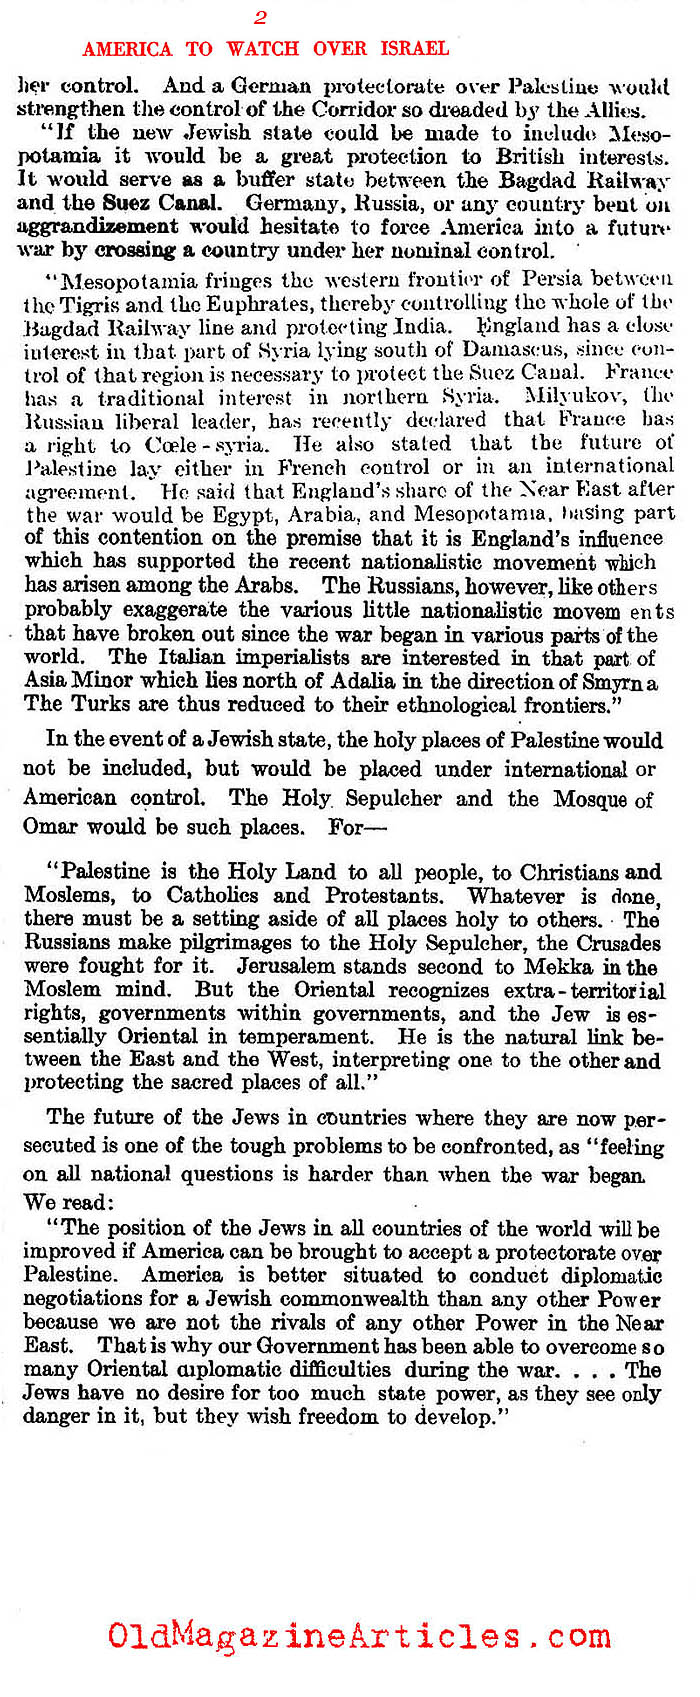 Anticipating America's Unique Relationship With Israel (Literary Digest, 1917)